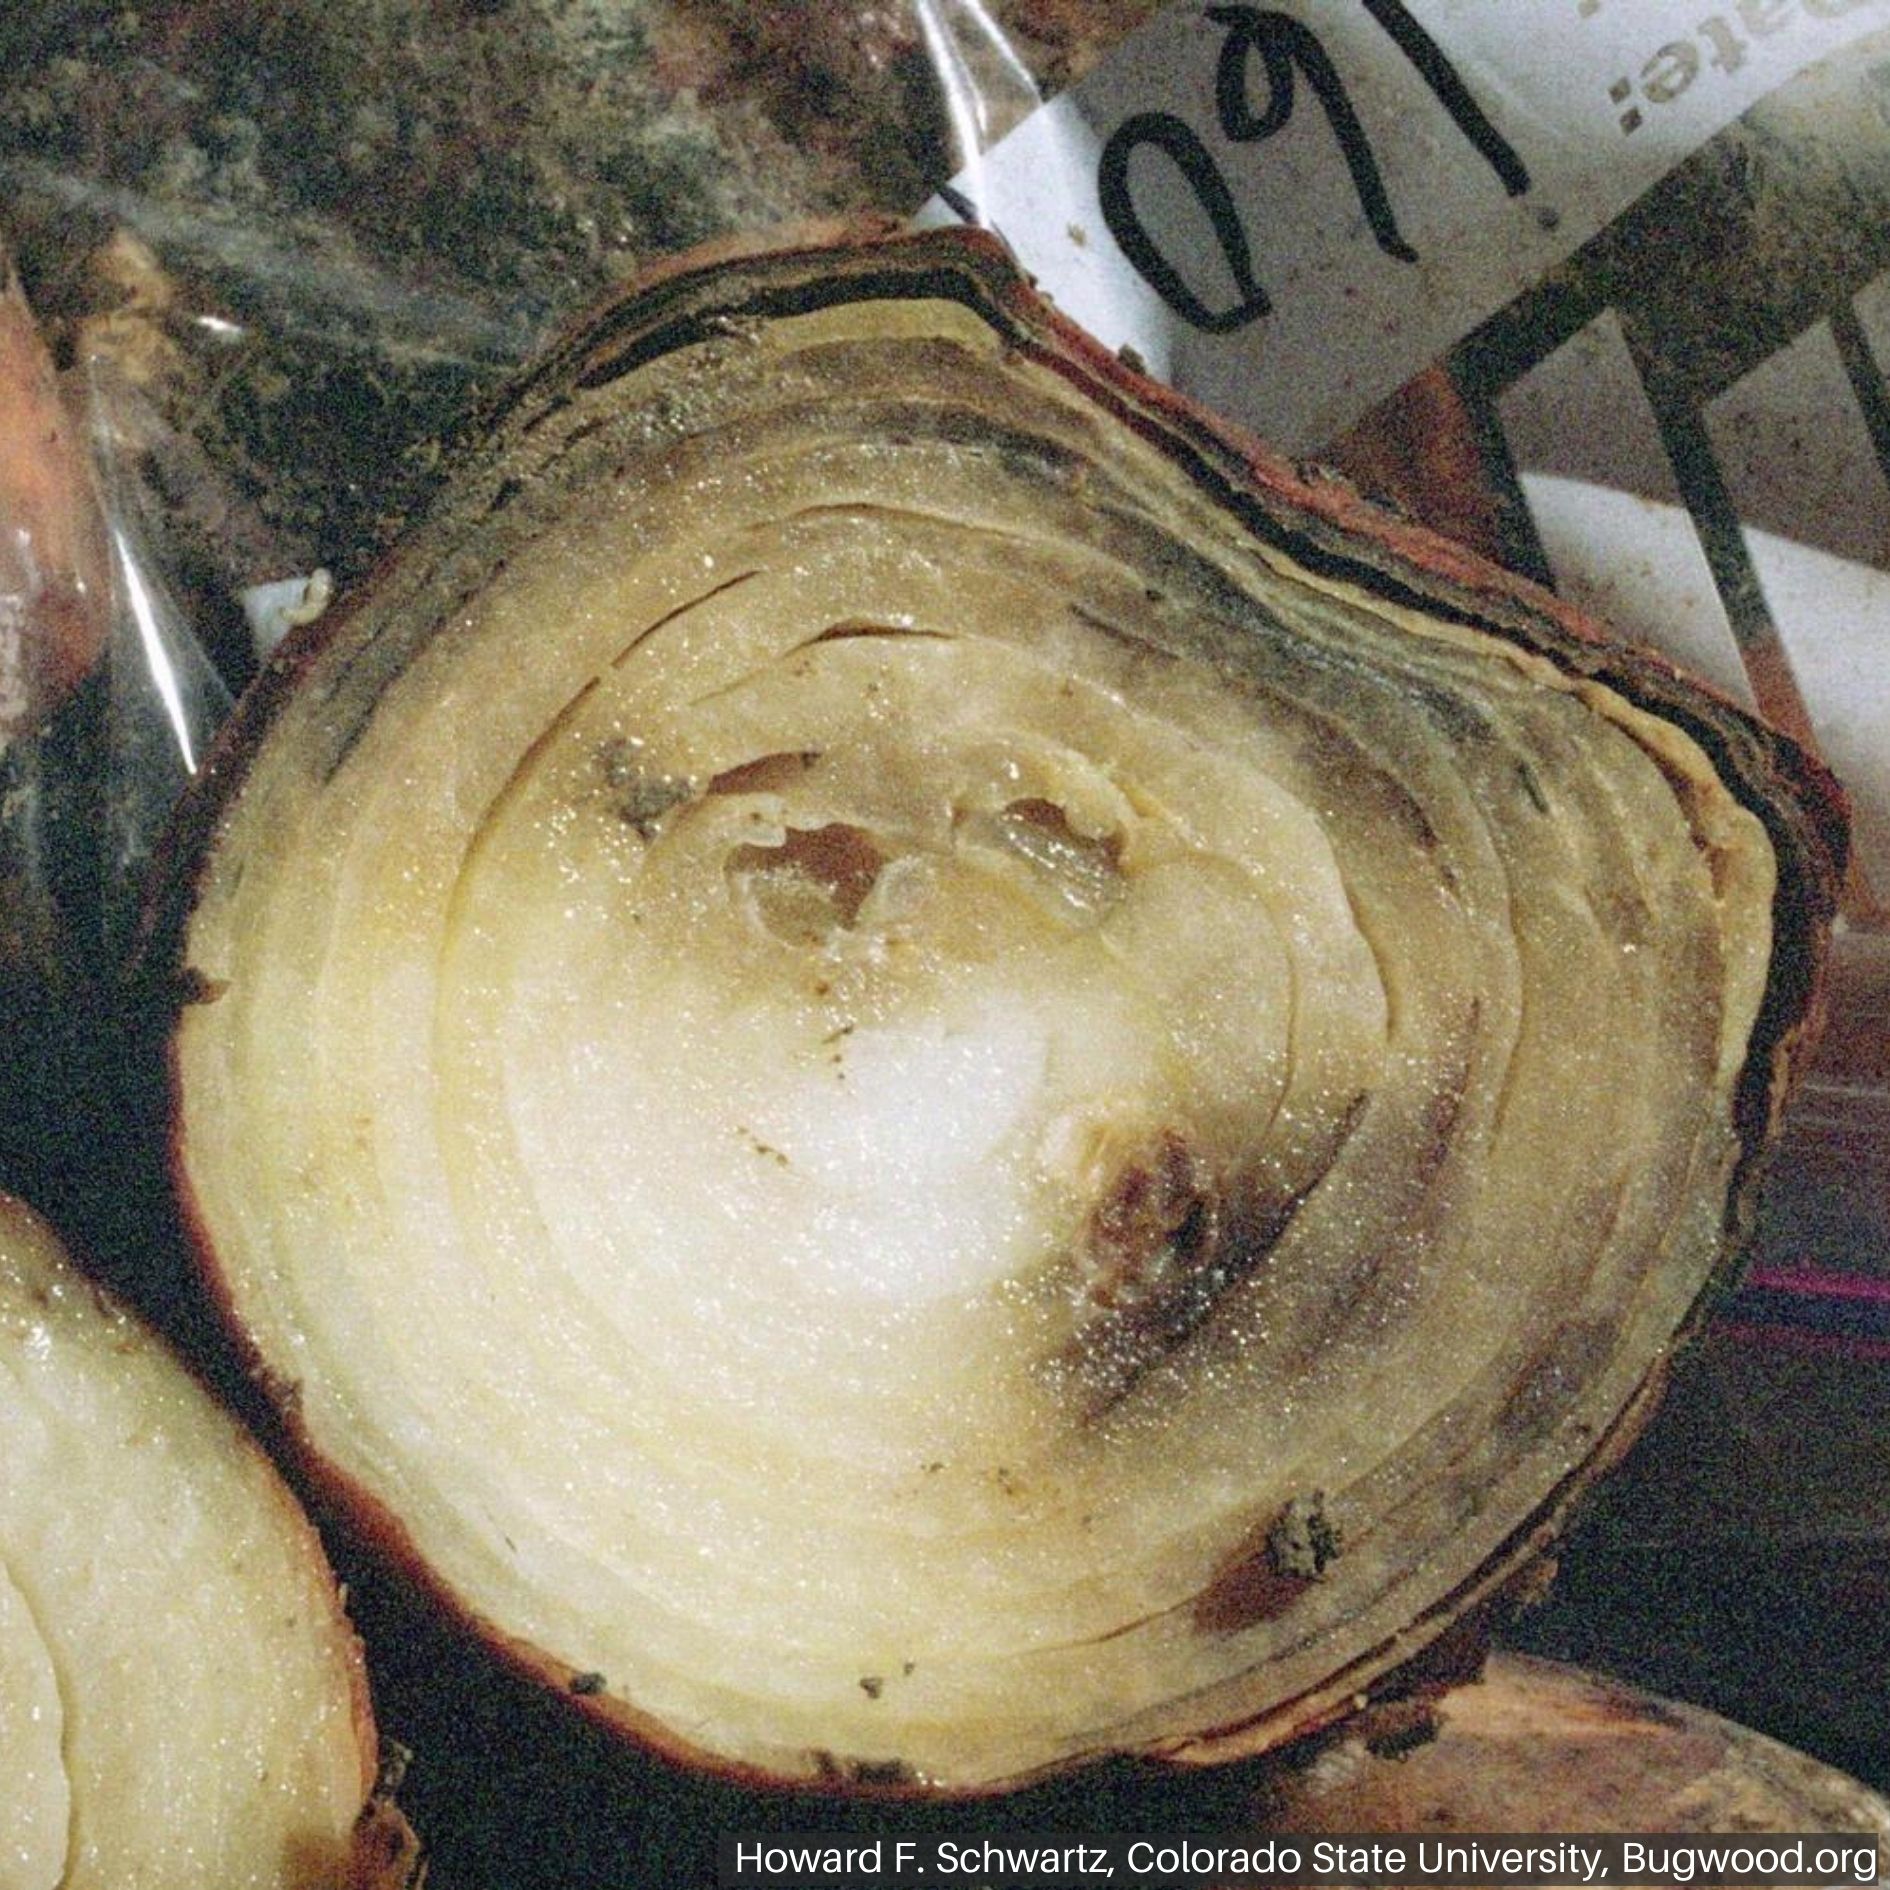 Severe damage from botrytis neck rot.